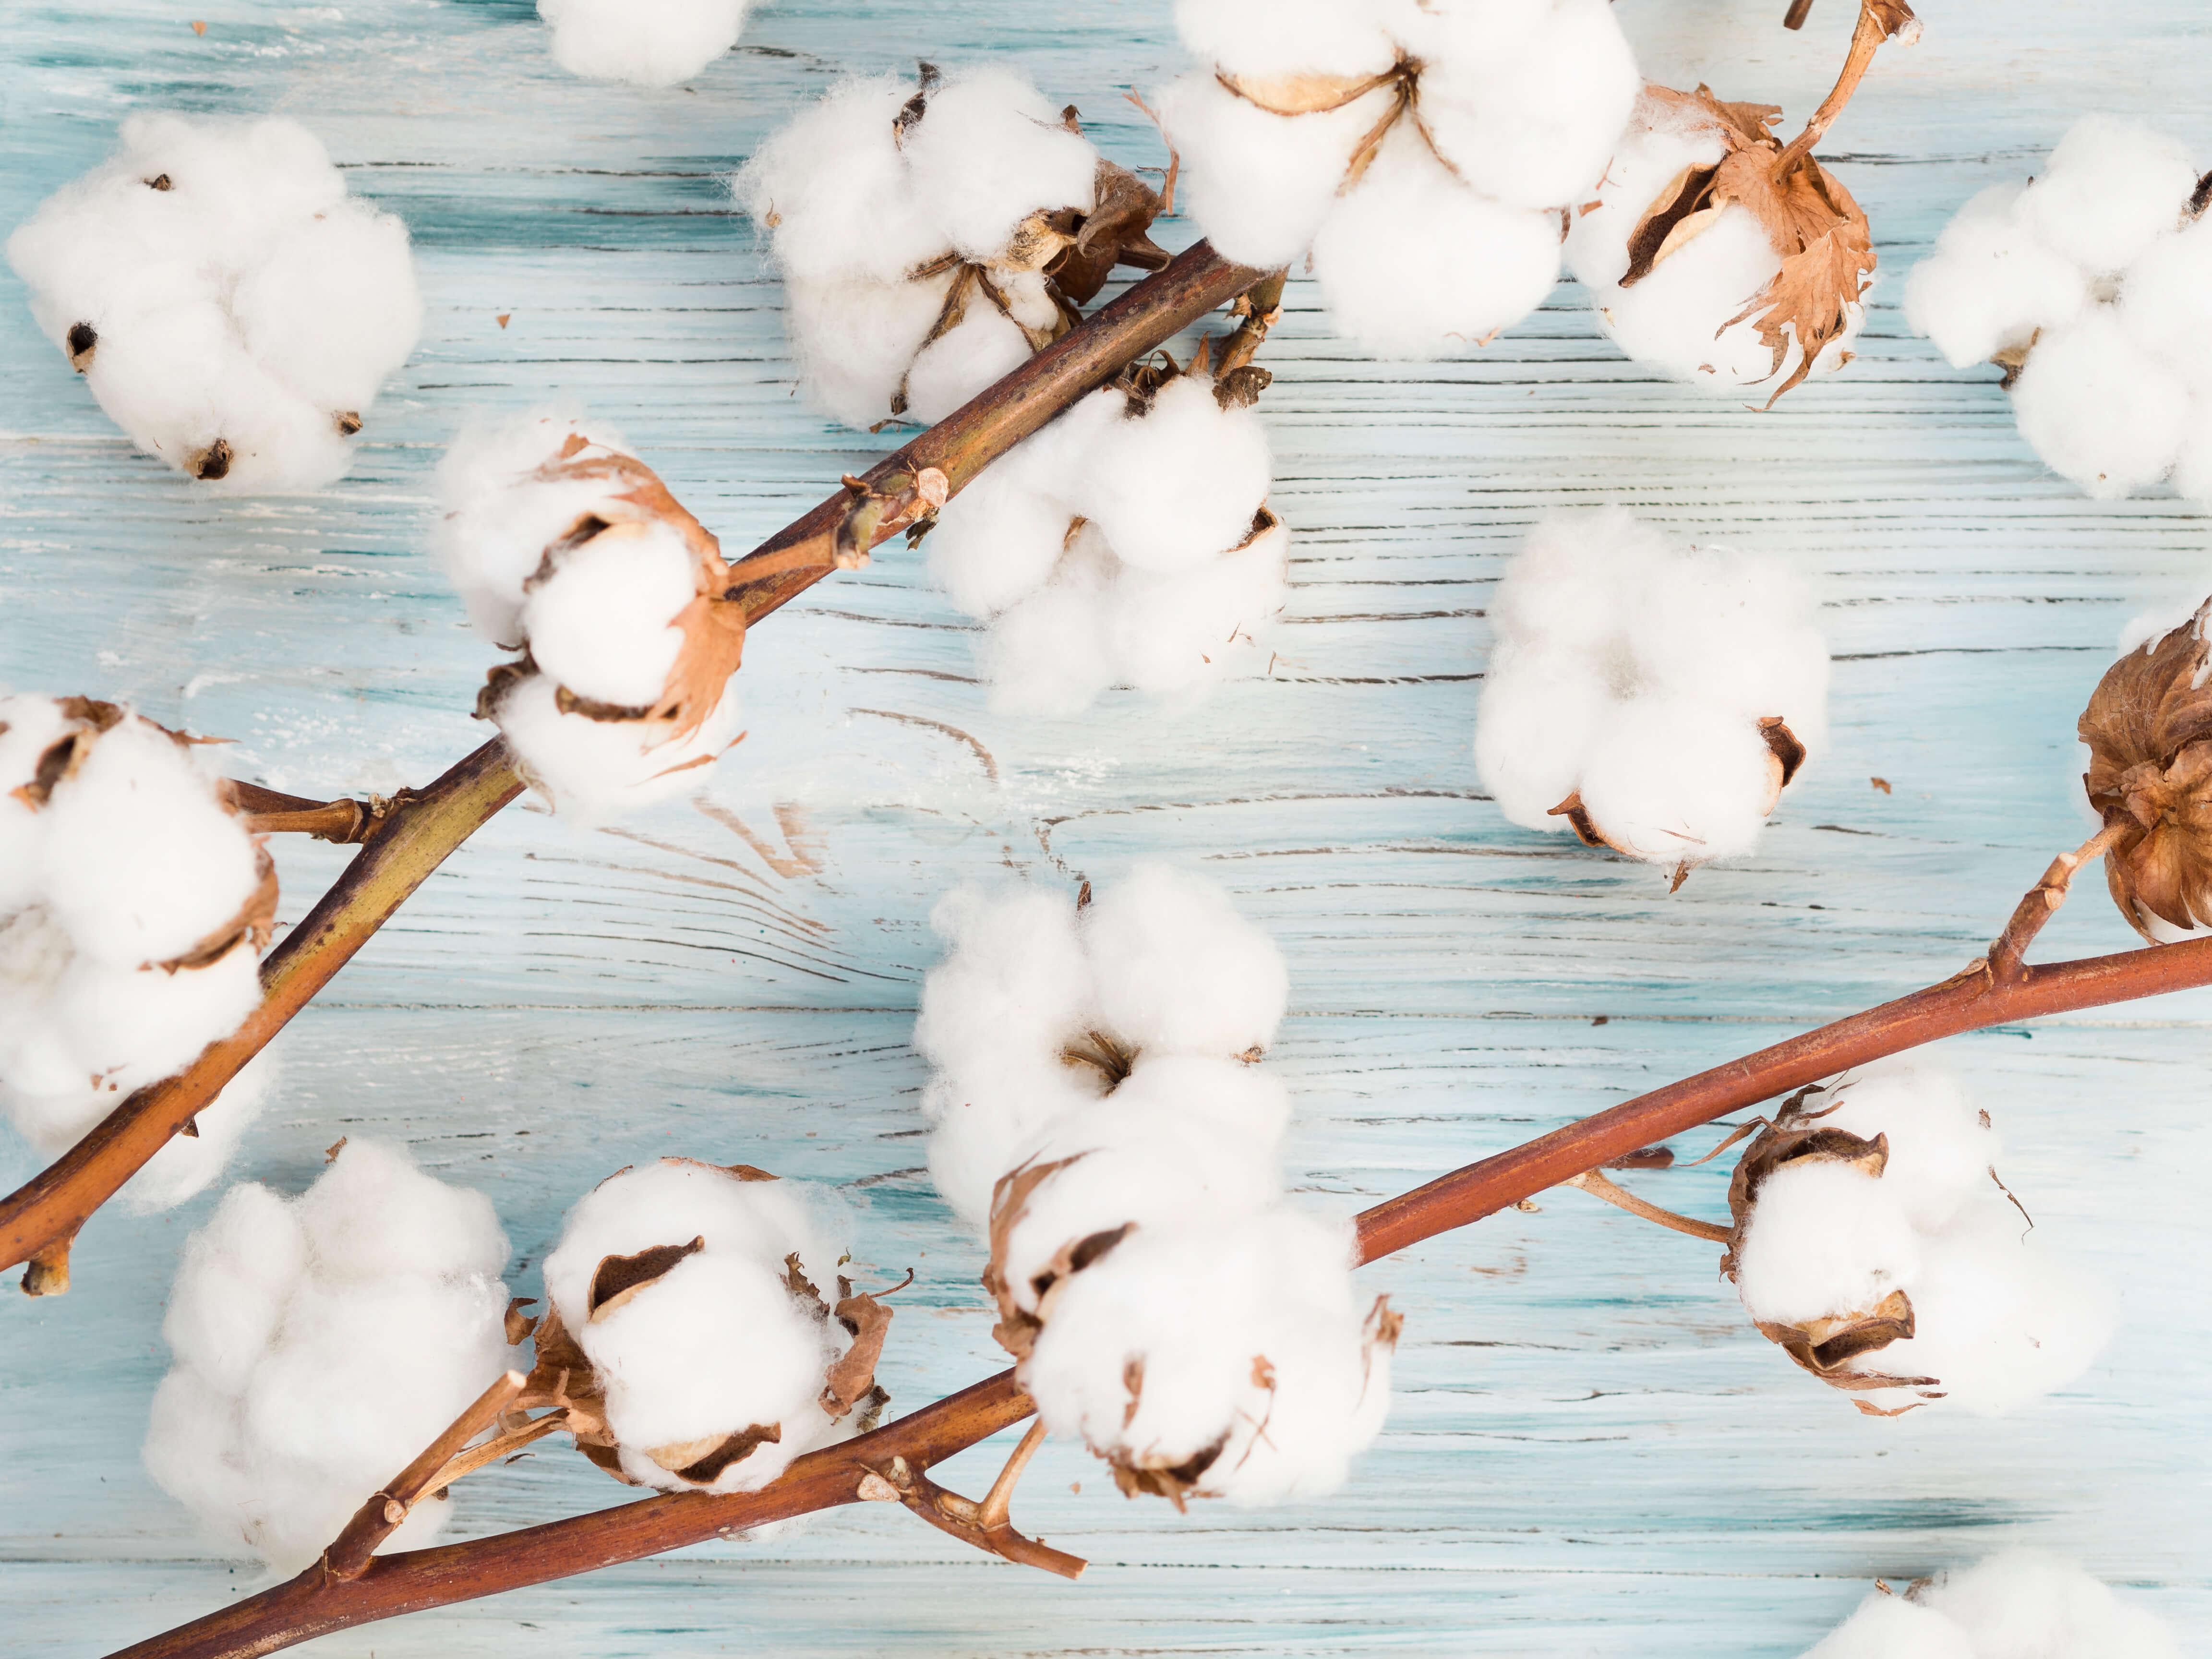 Cotton Futures slightly down on USDA’s reports